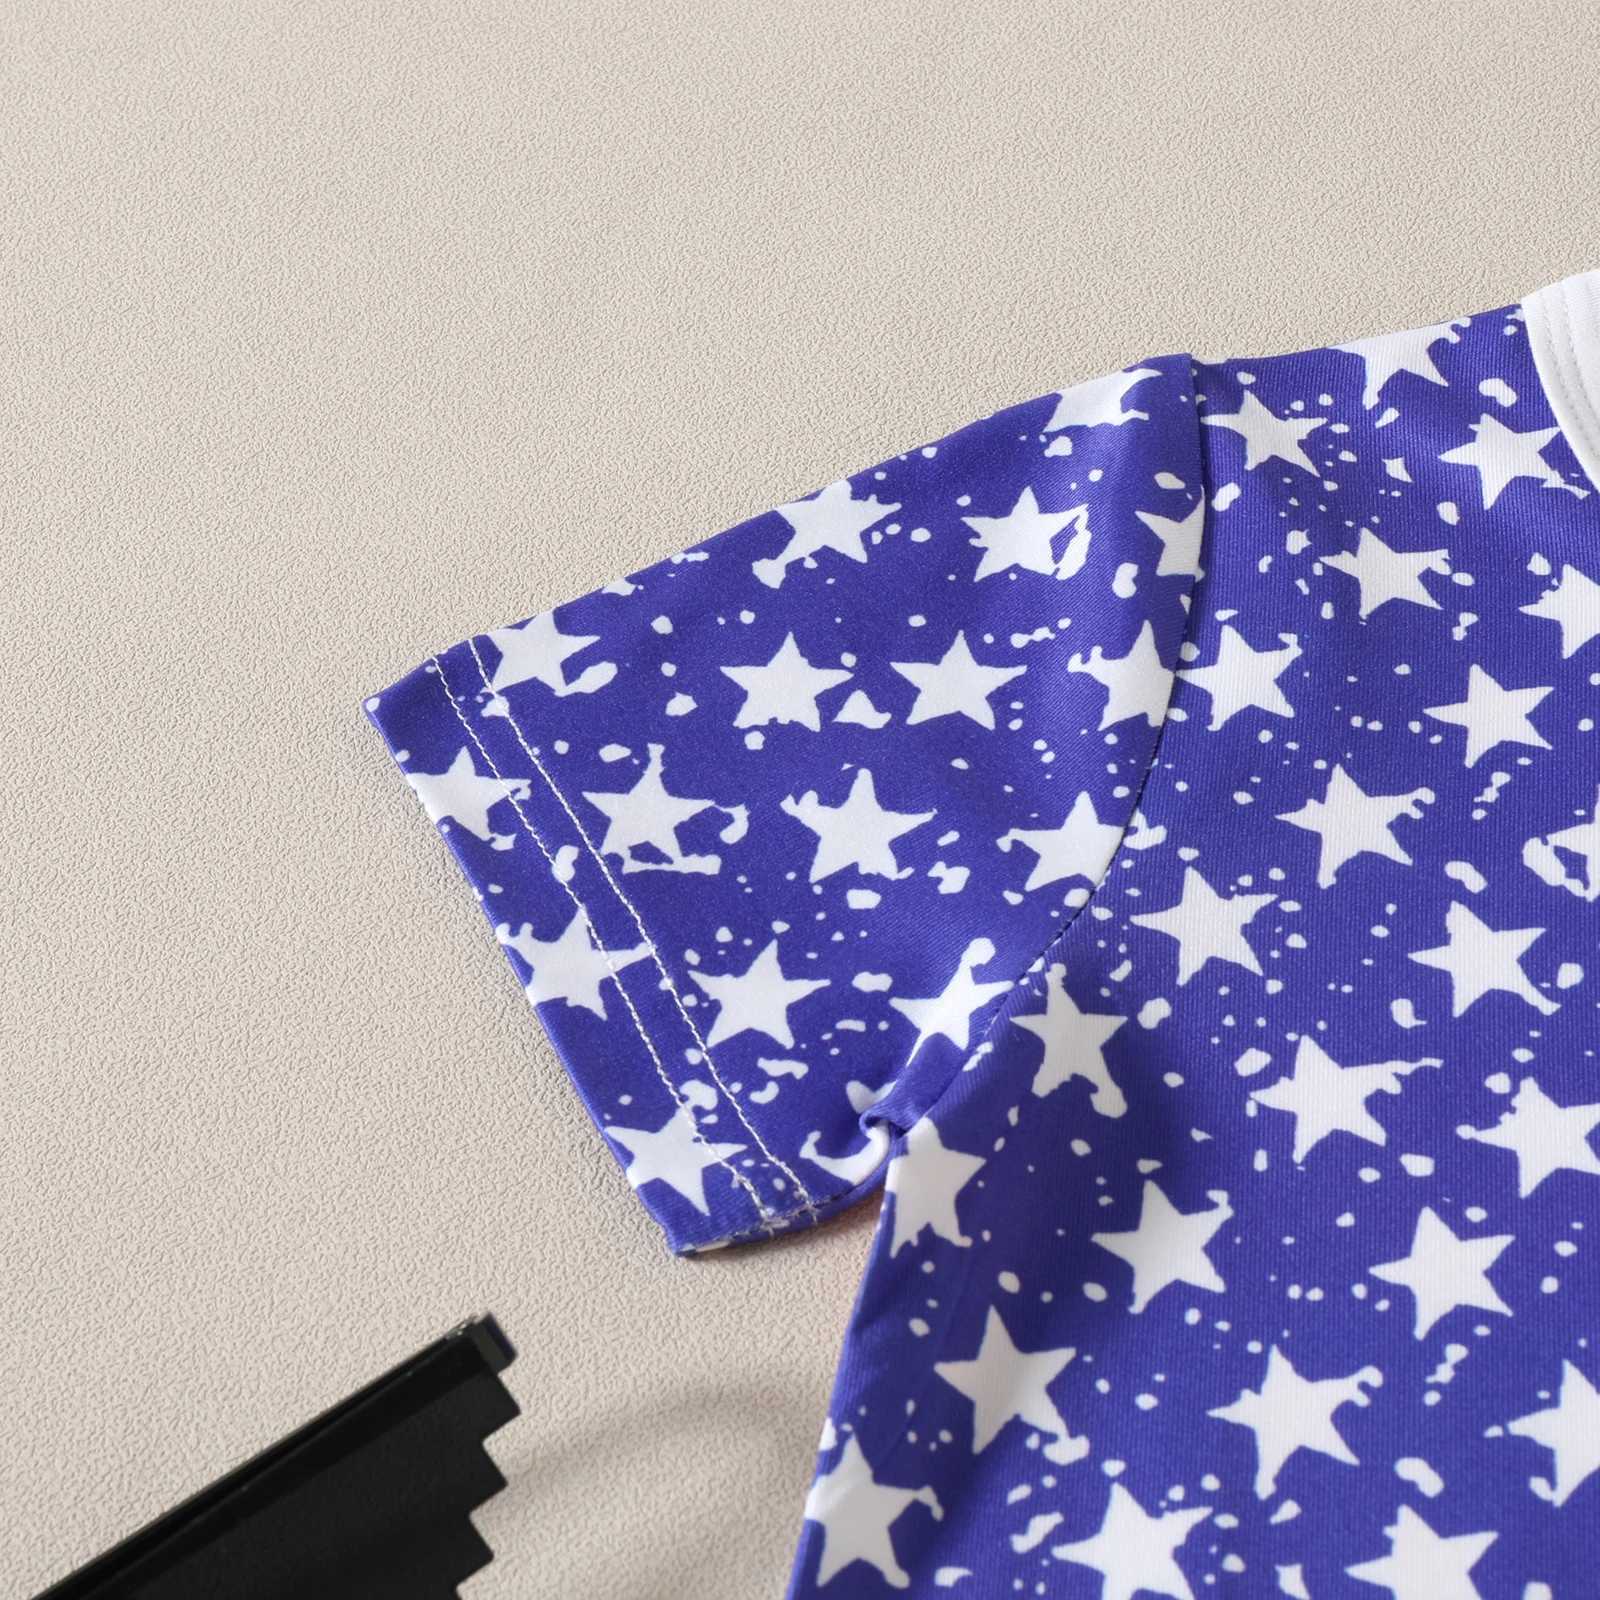 T-shirts Kid Boys Girls Shirts Short Sleeve Round Neck Star Star Striped Prist Party Casual Summer Tops H240508